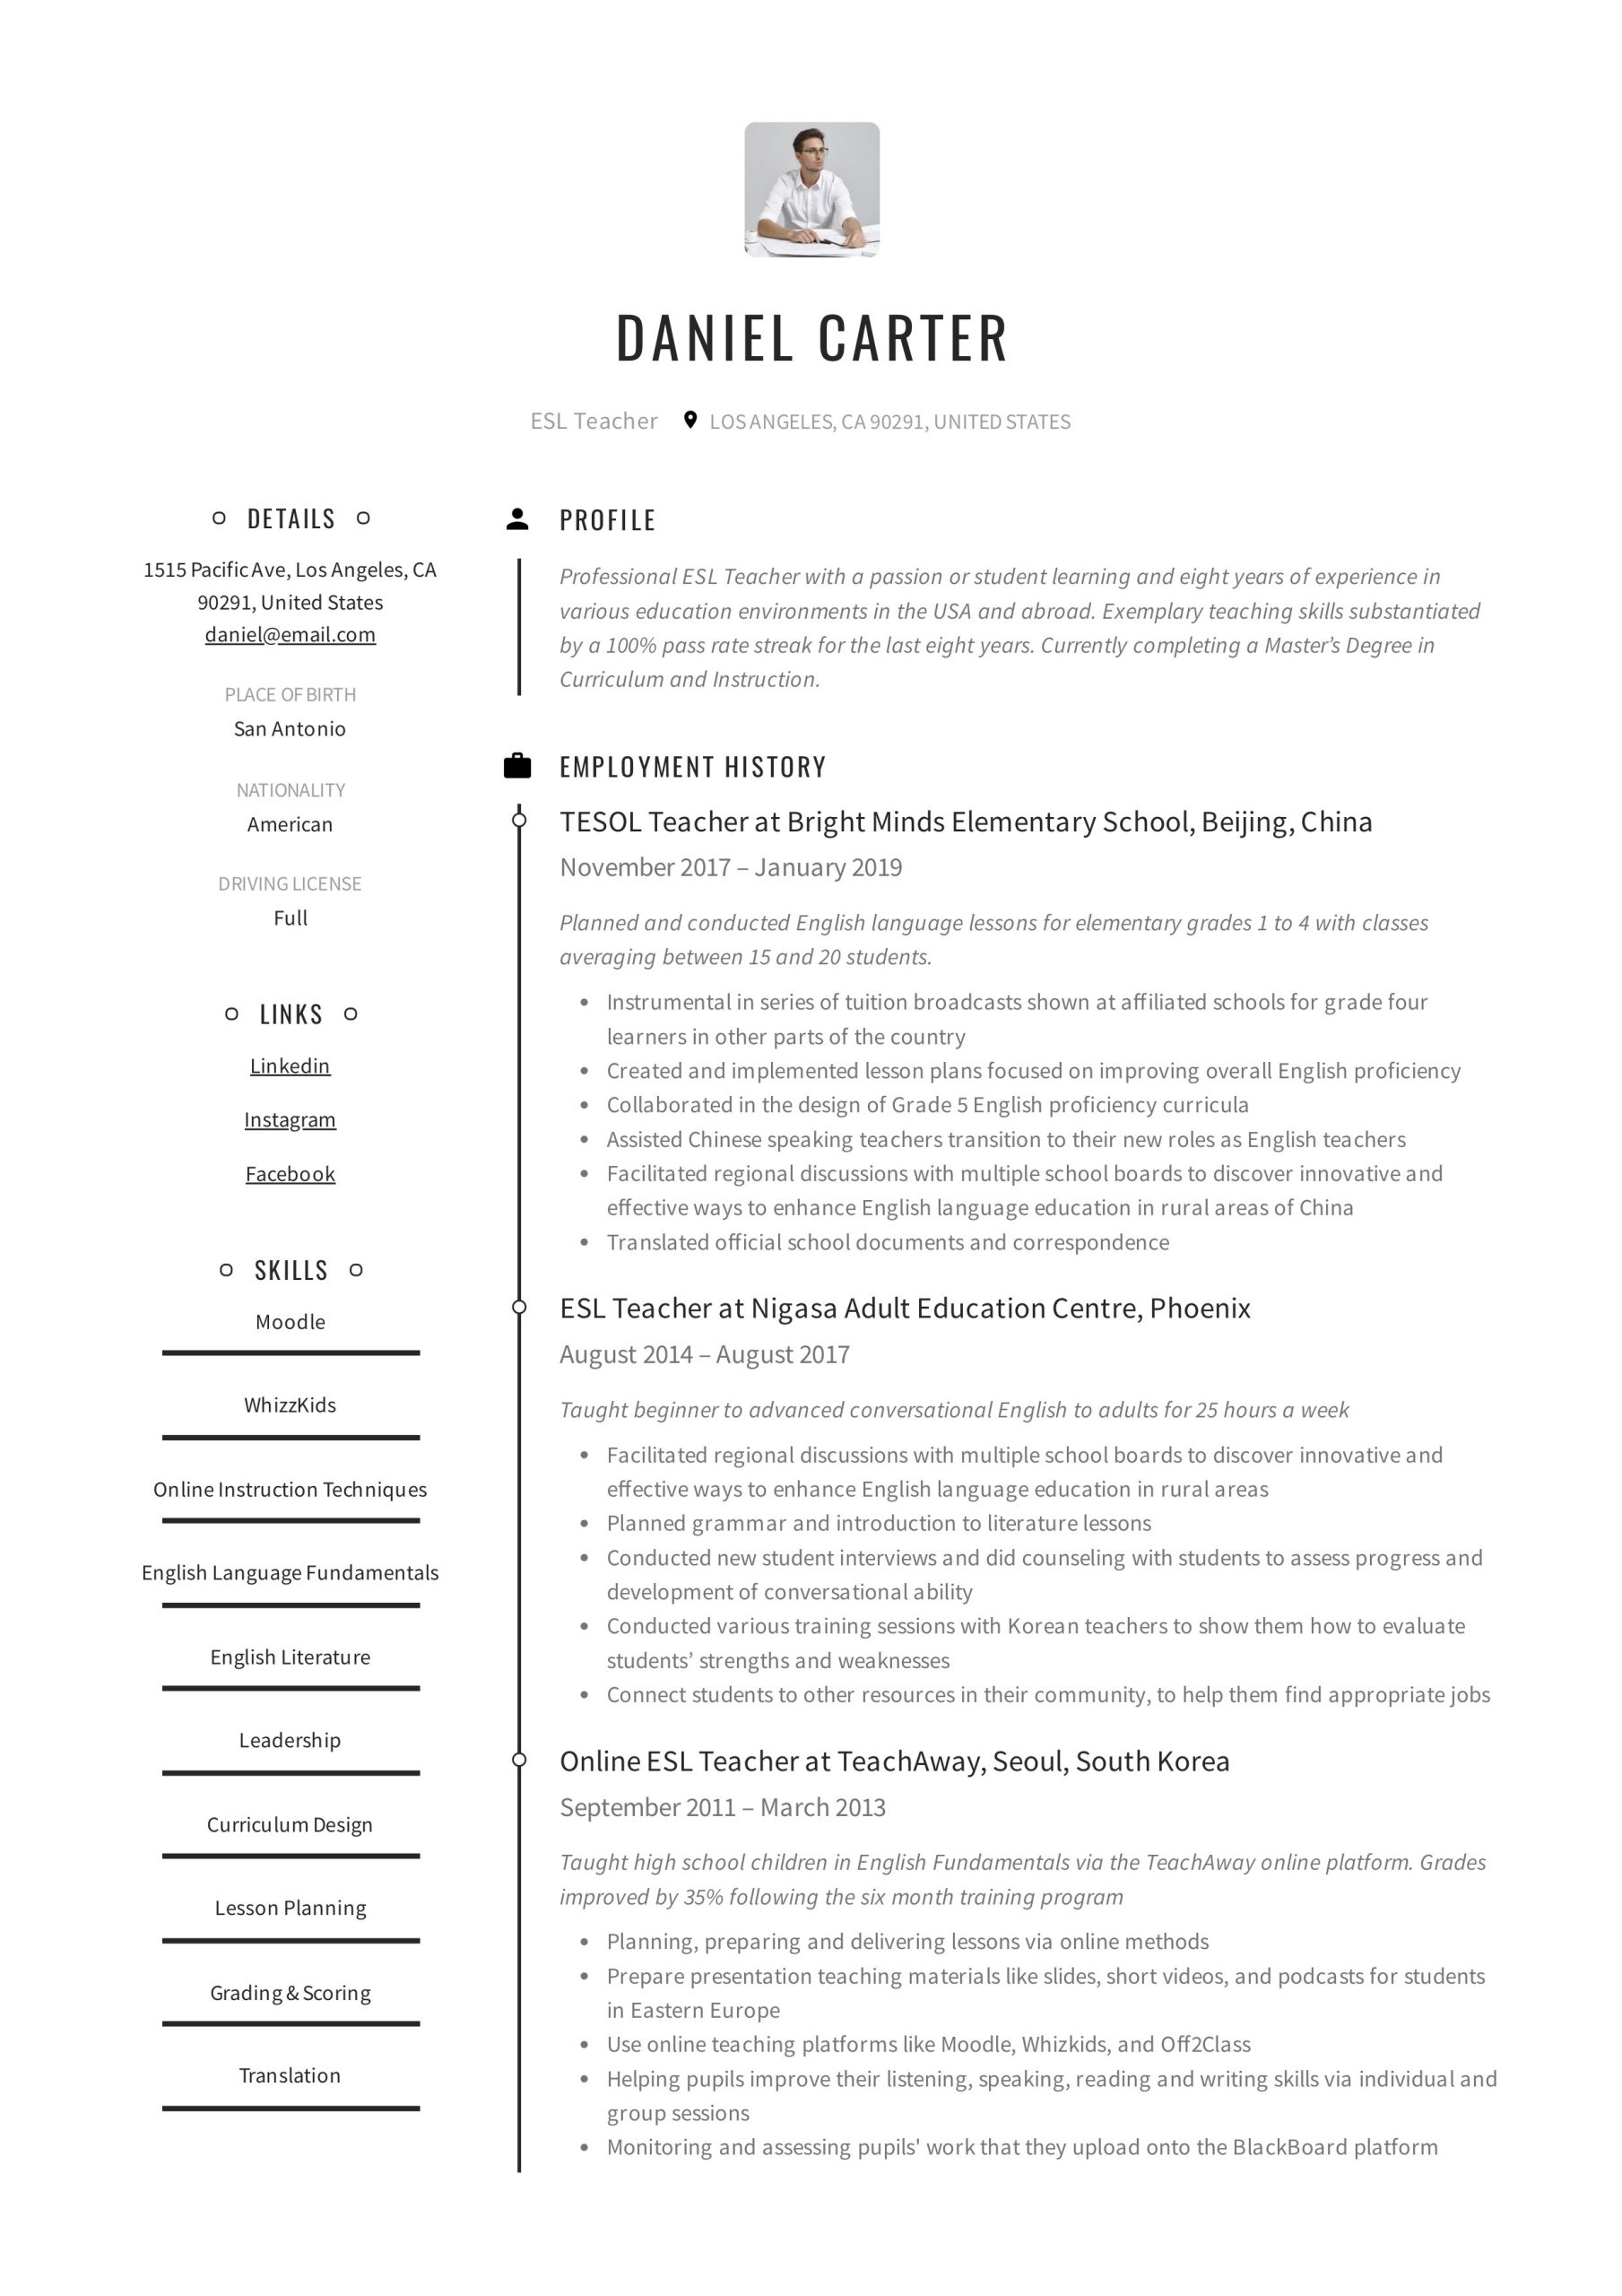 Tesl Lead Resume Sample that Can Get You Interview 19 Esl Teacher Resume Examples & Writing Guide 2022